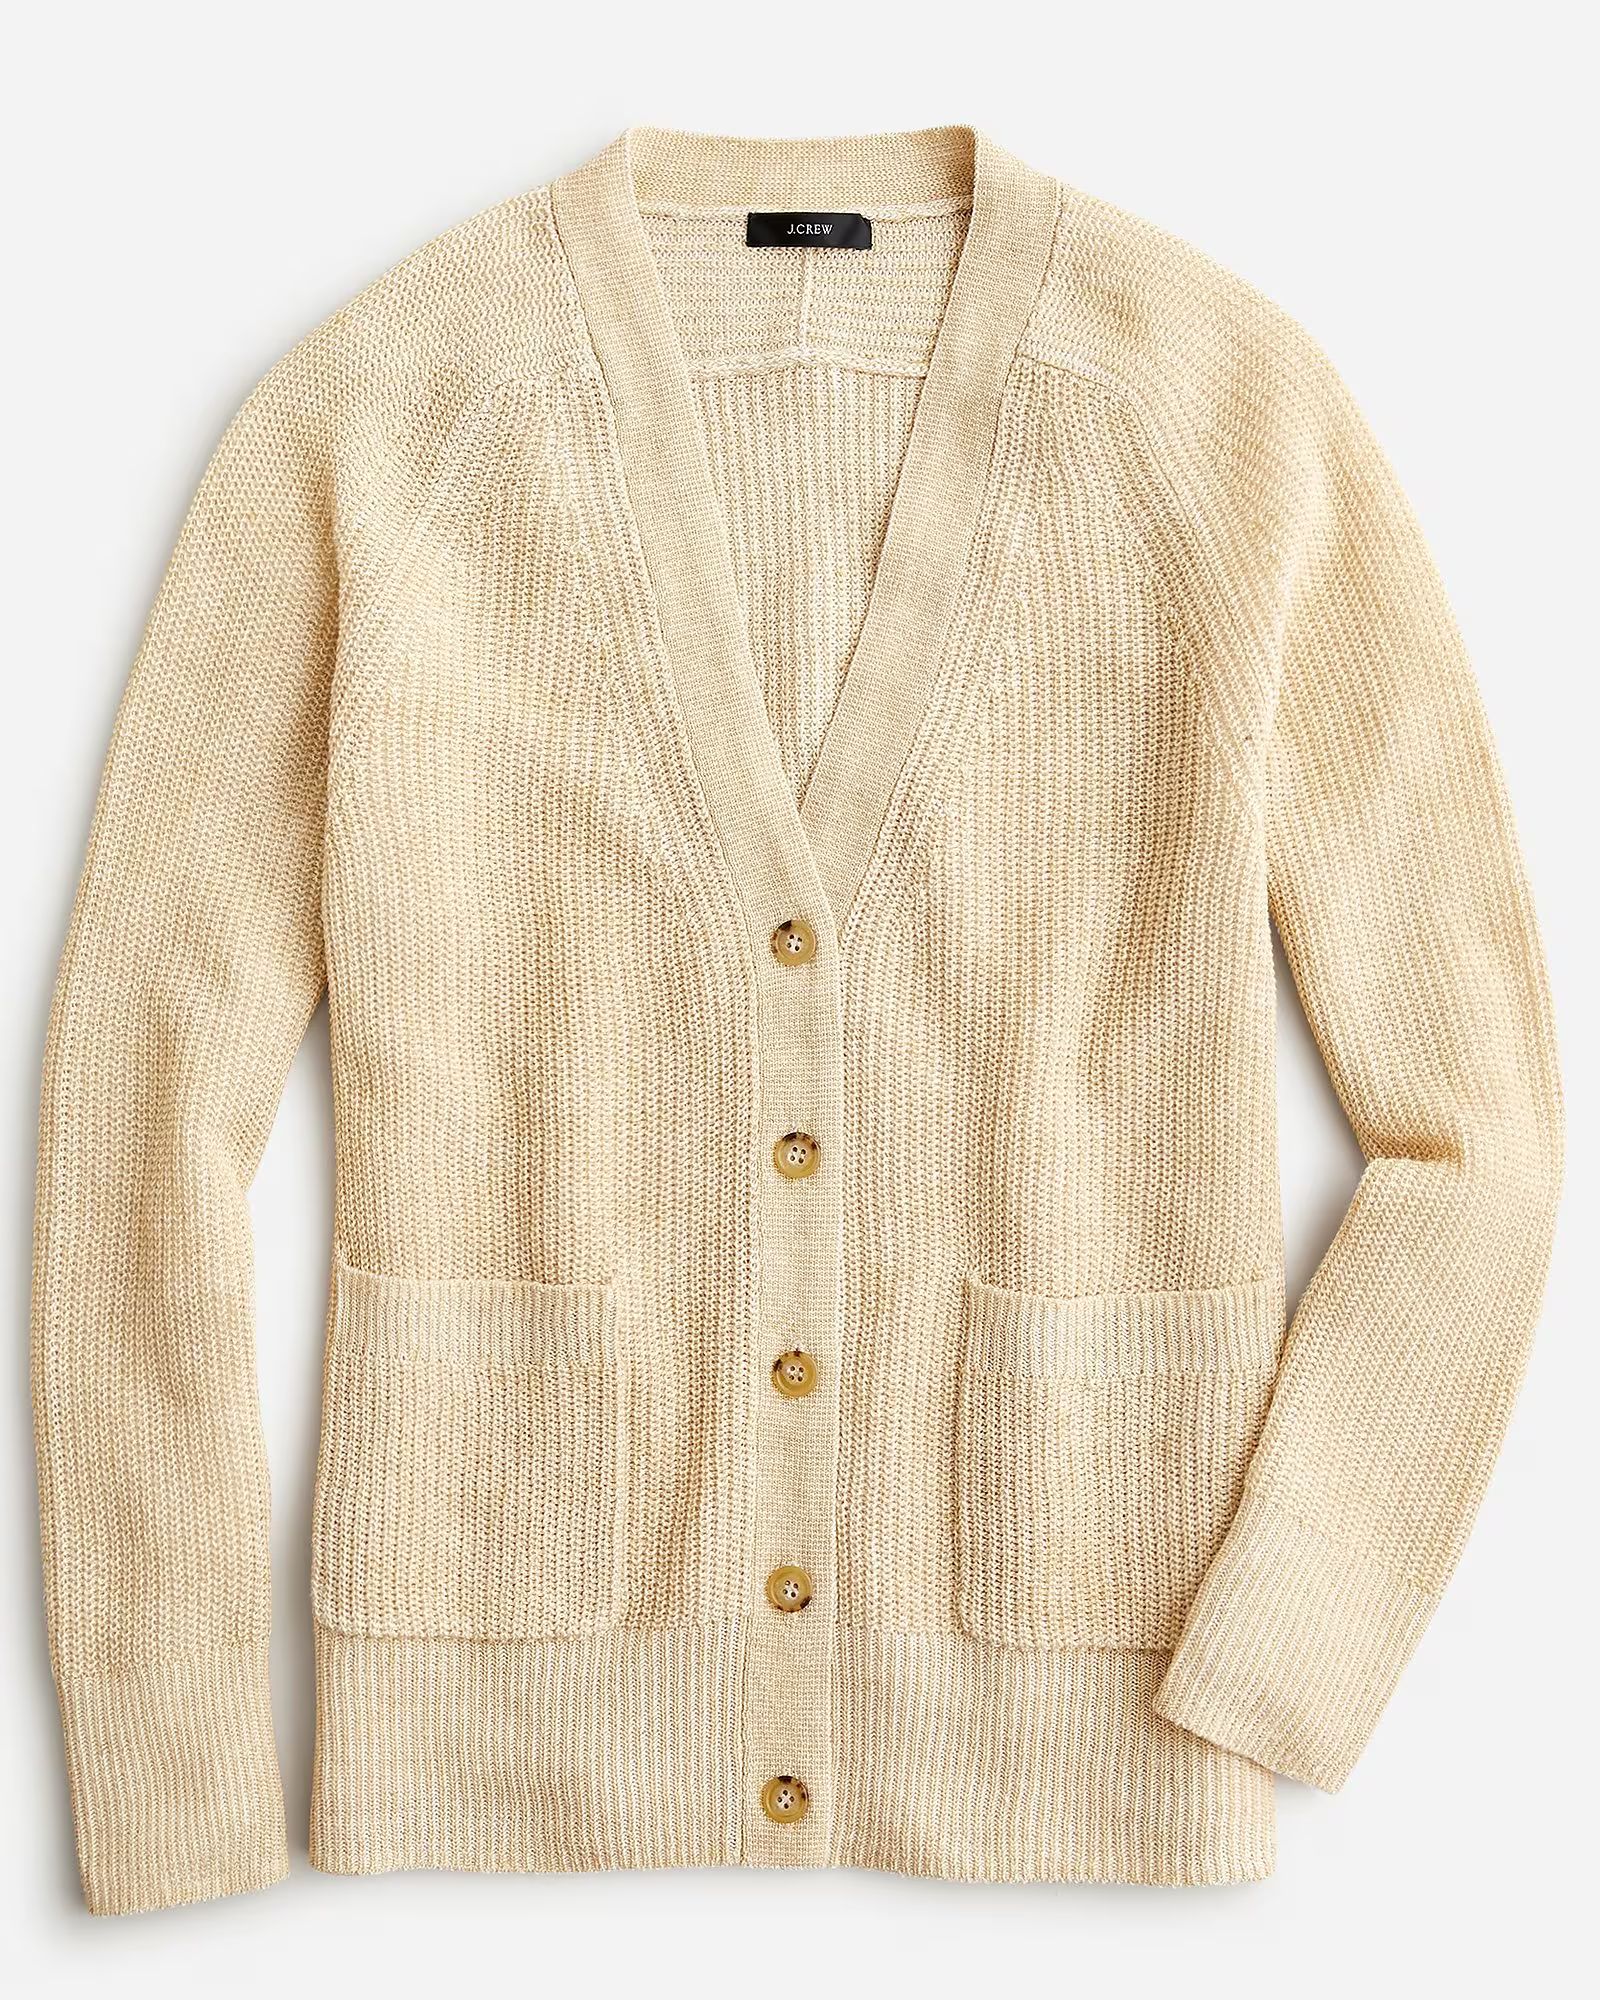 Relaxed cardigan sweater in linen-cotton blend | J.Crew US